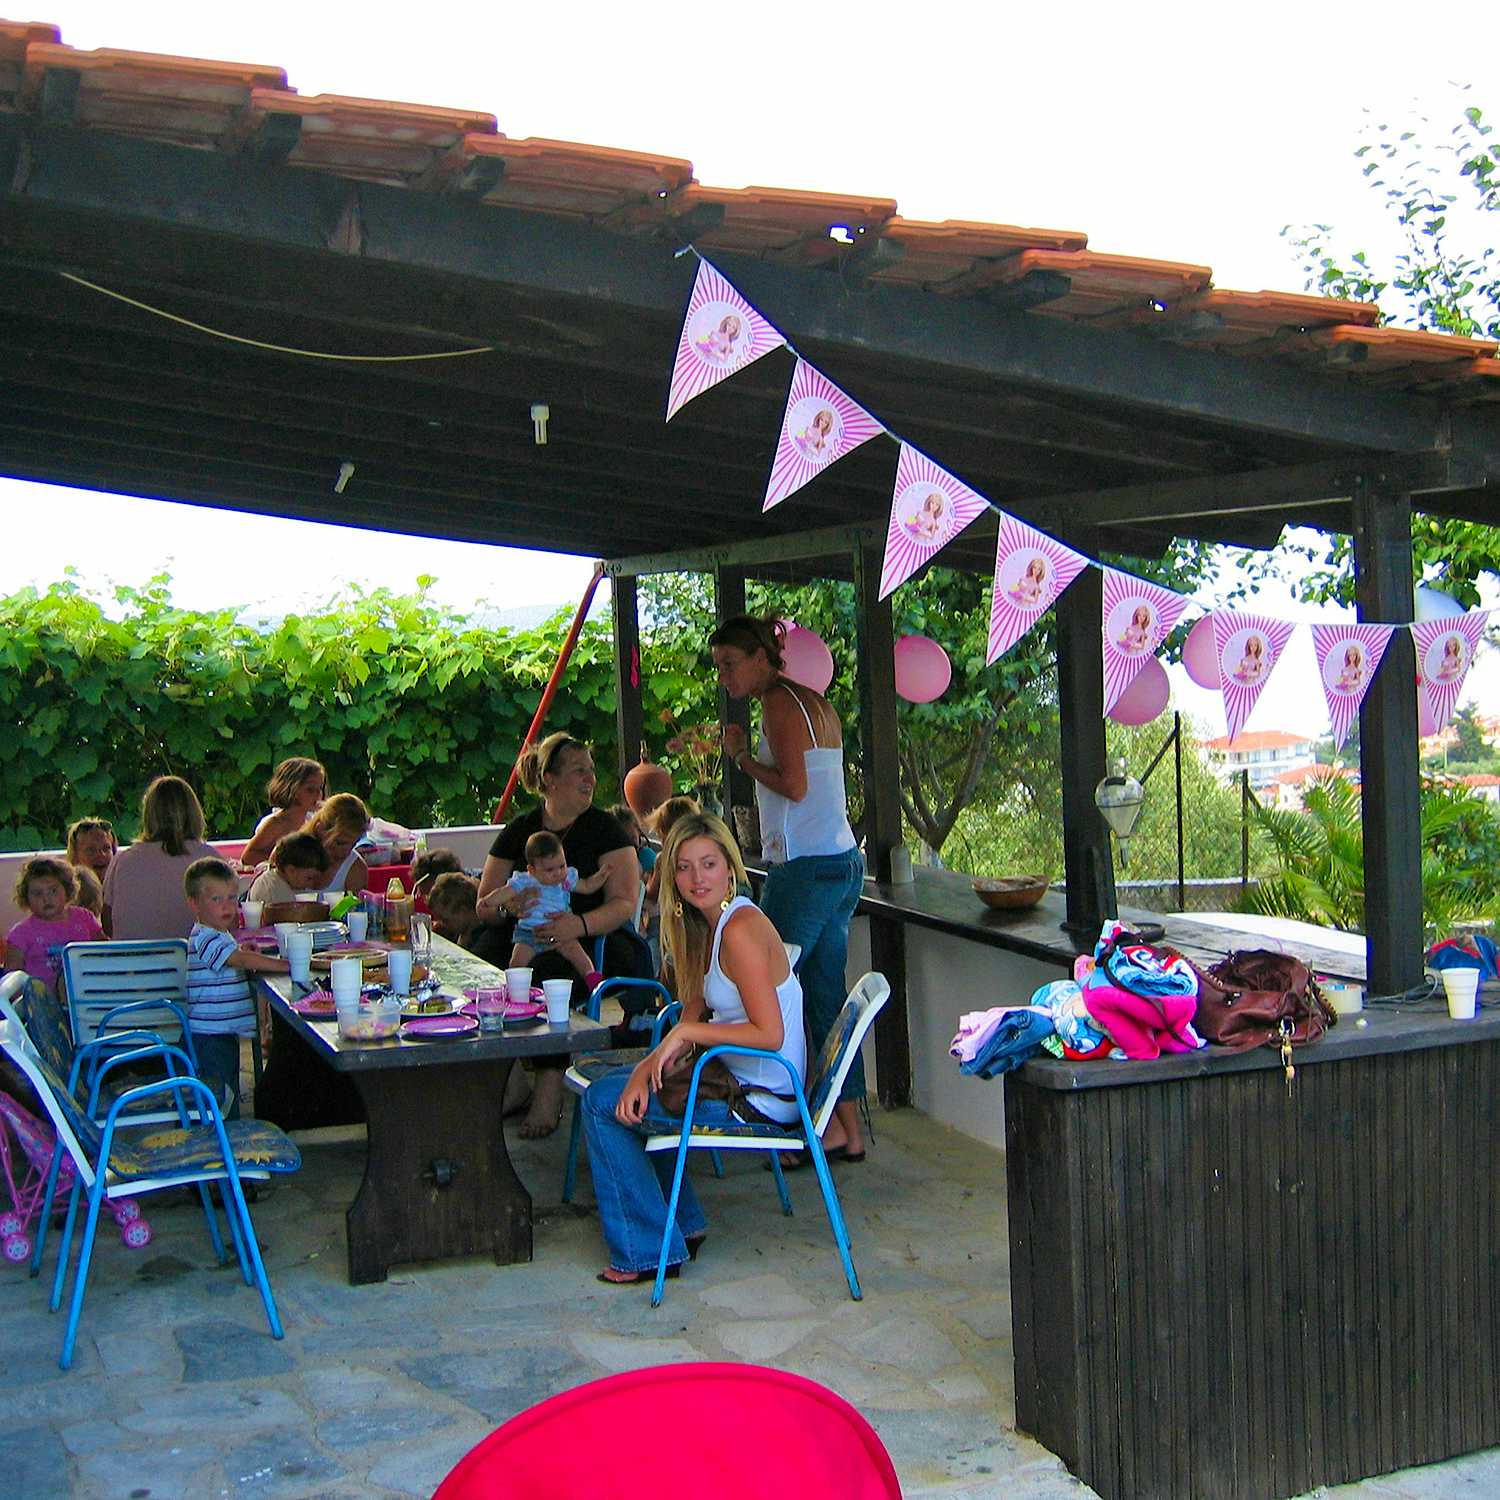 Photo Caption: Throw an outdoor party for your child's birthday or special occasion